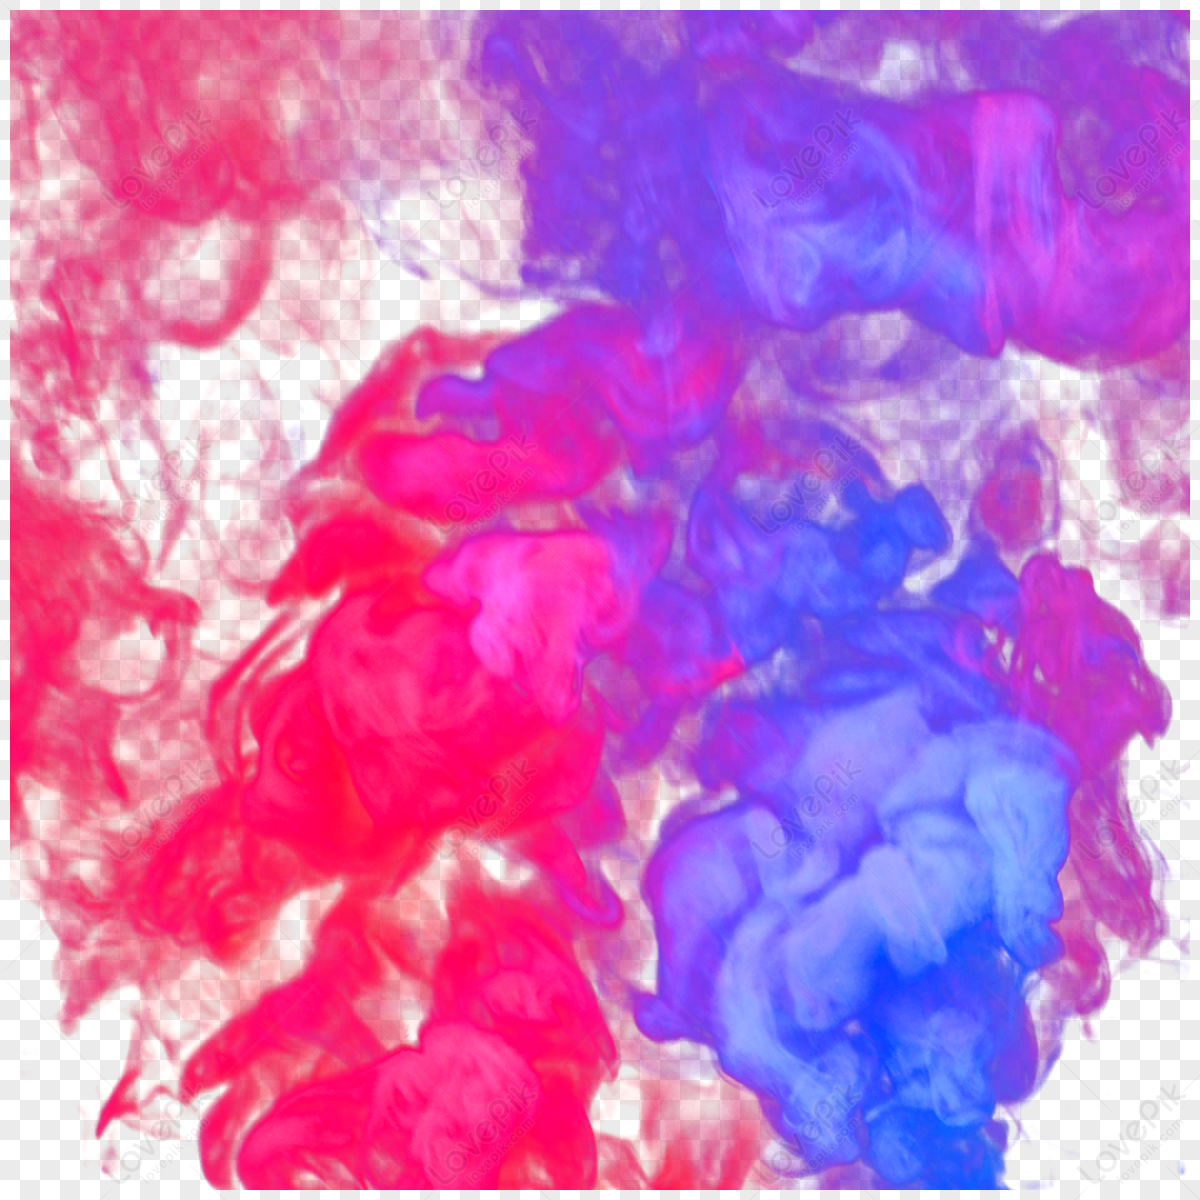 Colorful Cloud Texture Explosion Smoke,purple,pink,paint PNG White ...